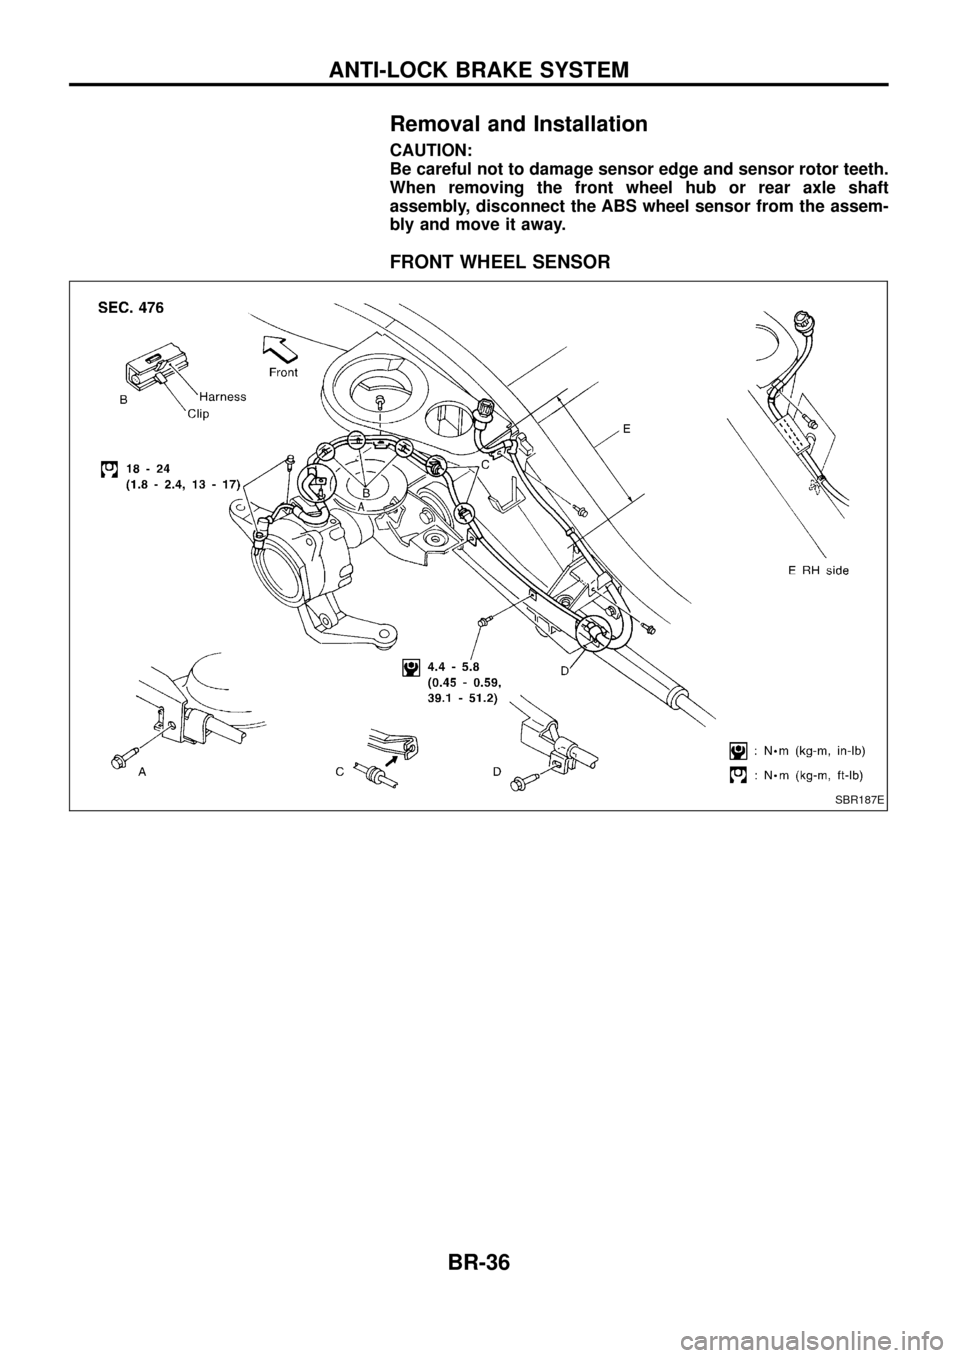 NISSAN PATROL 1998 Y61 / 5.G Brake System Workshop Manual Removal and Installation
CAUTION:
Be careful not to damage sensor edge and sensor rotor teeth.
When removing the front wheel hub or rear axle shaft
assembly, disconnect the ABS wheel sensor from the a